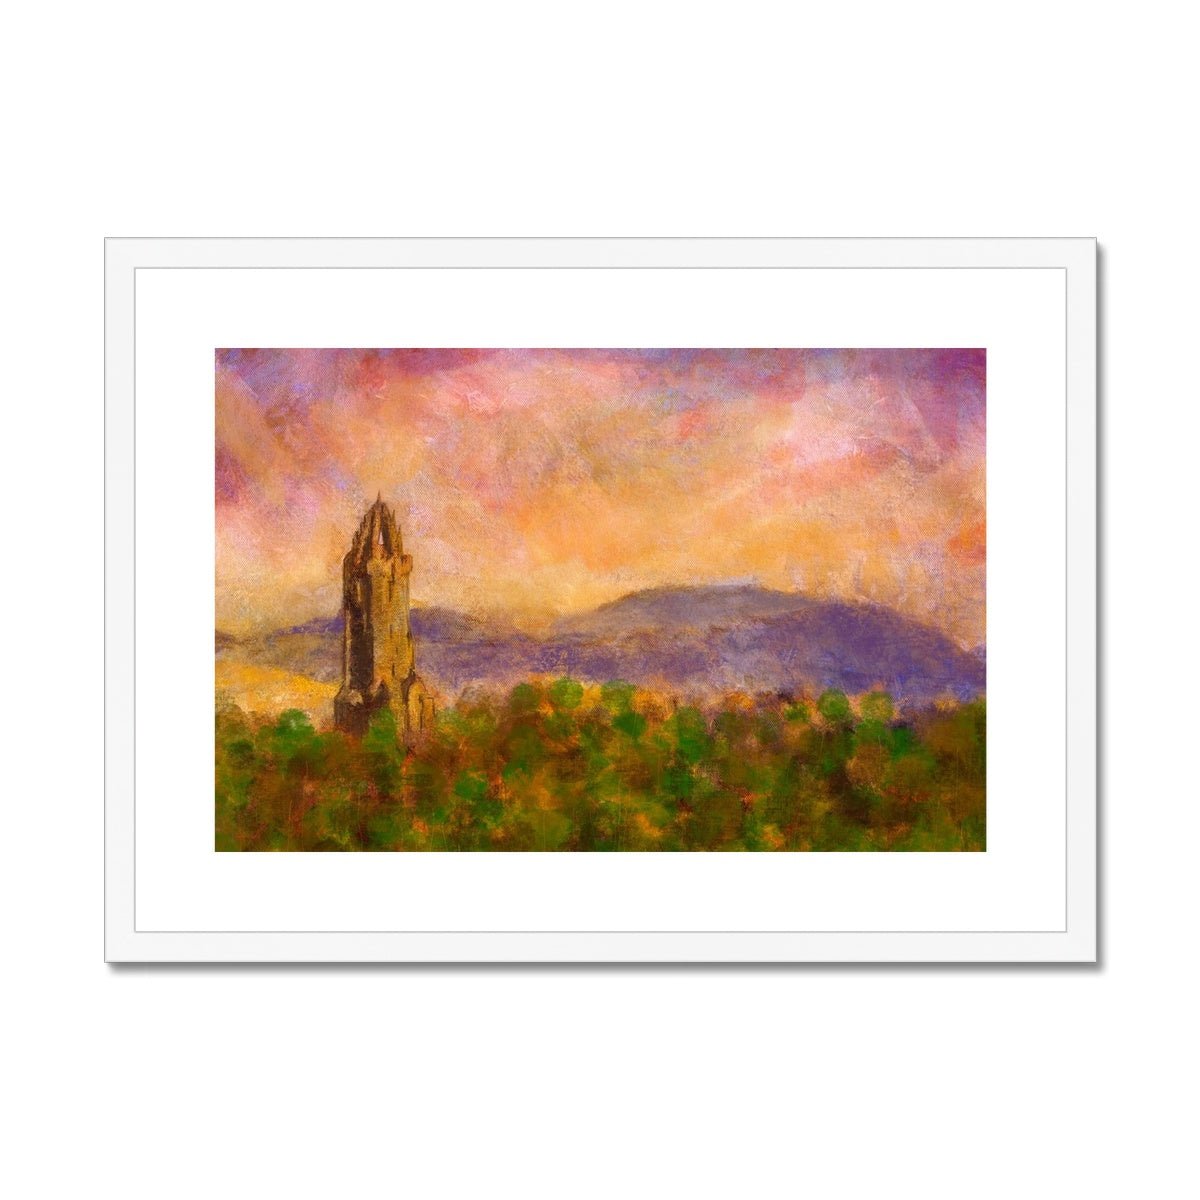 Wallace Monument Dusk Painting | Framed & Mounted Prints From Scotland-Framed & Mounted Prints-Historic & Iconic Scotland Art Gallery-A2 Landscape-White Frame-Paintings, Prints, Homeware, Art Gifts From Scotland By Scottish Artist Kevin Hunter